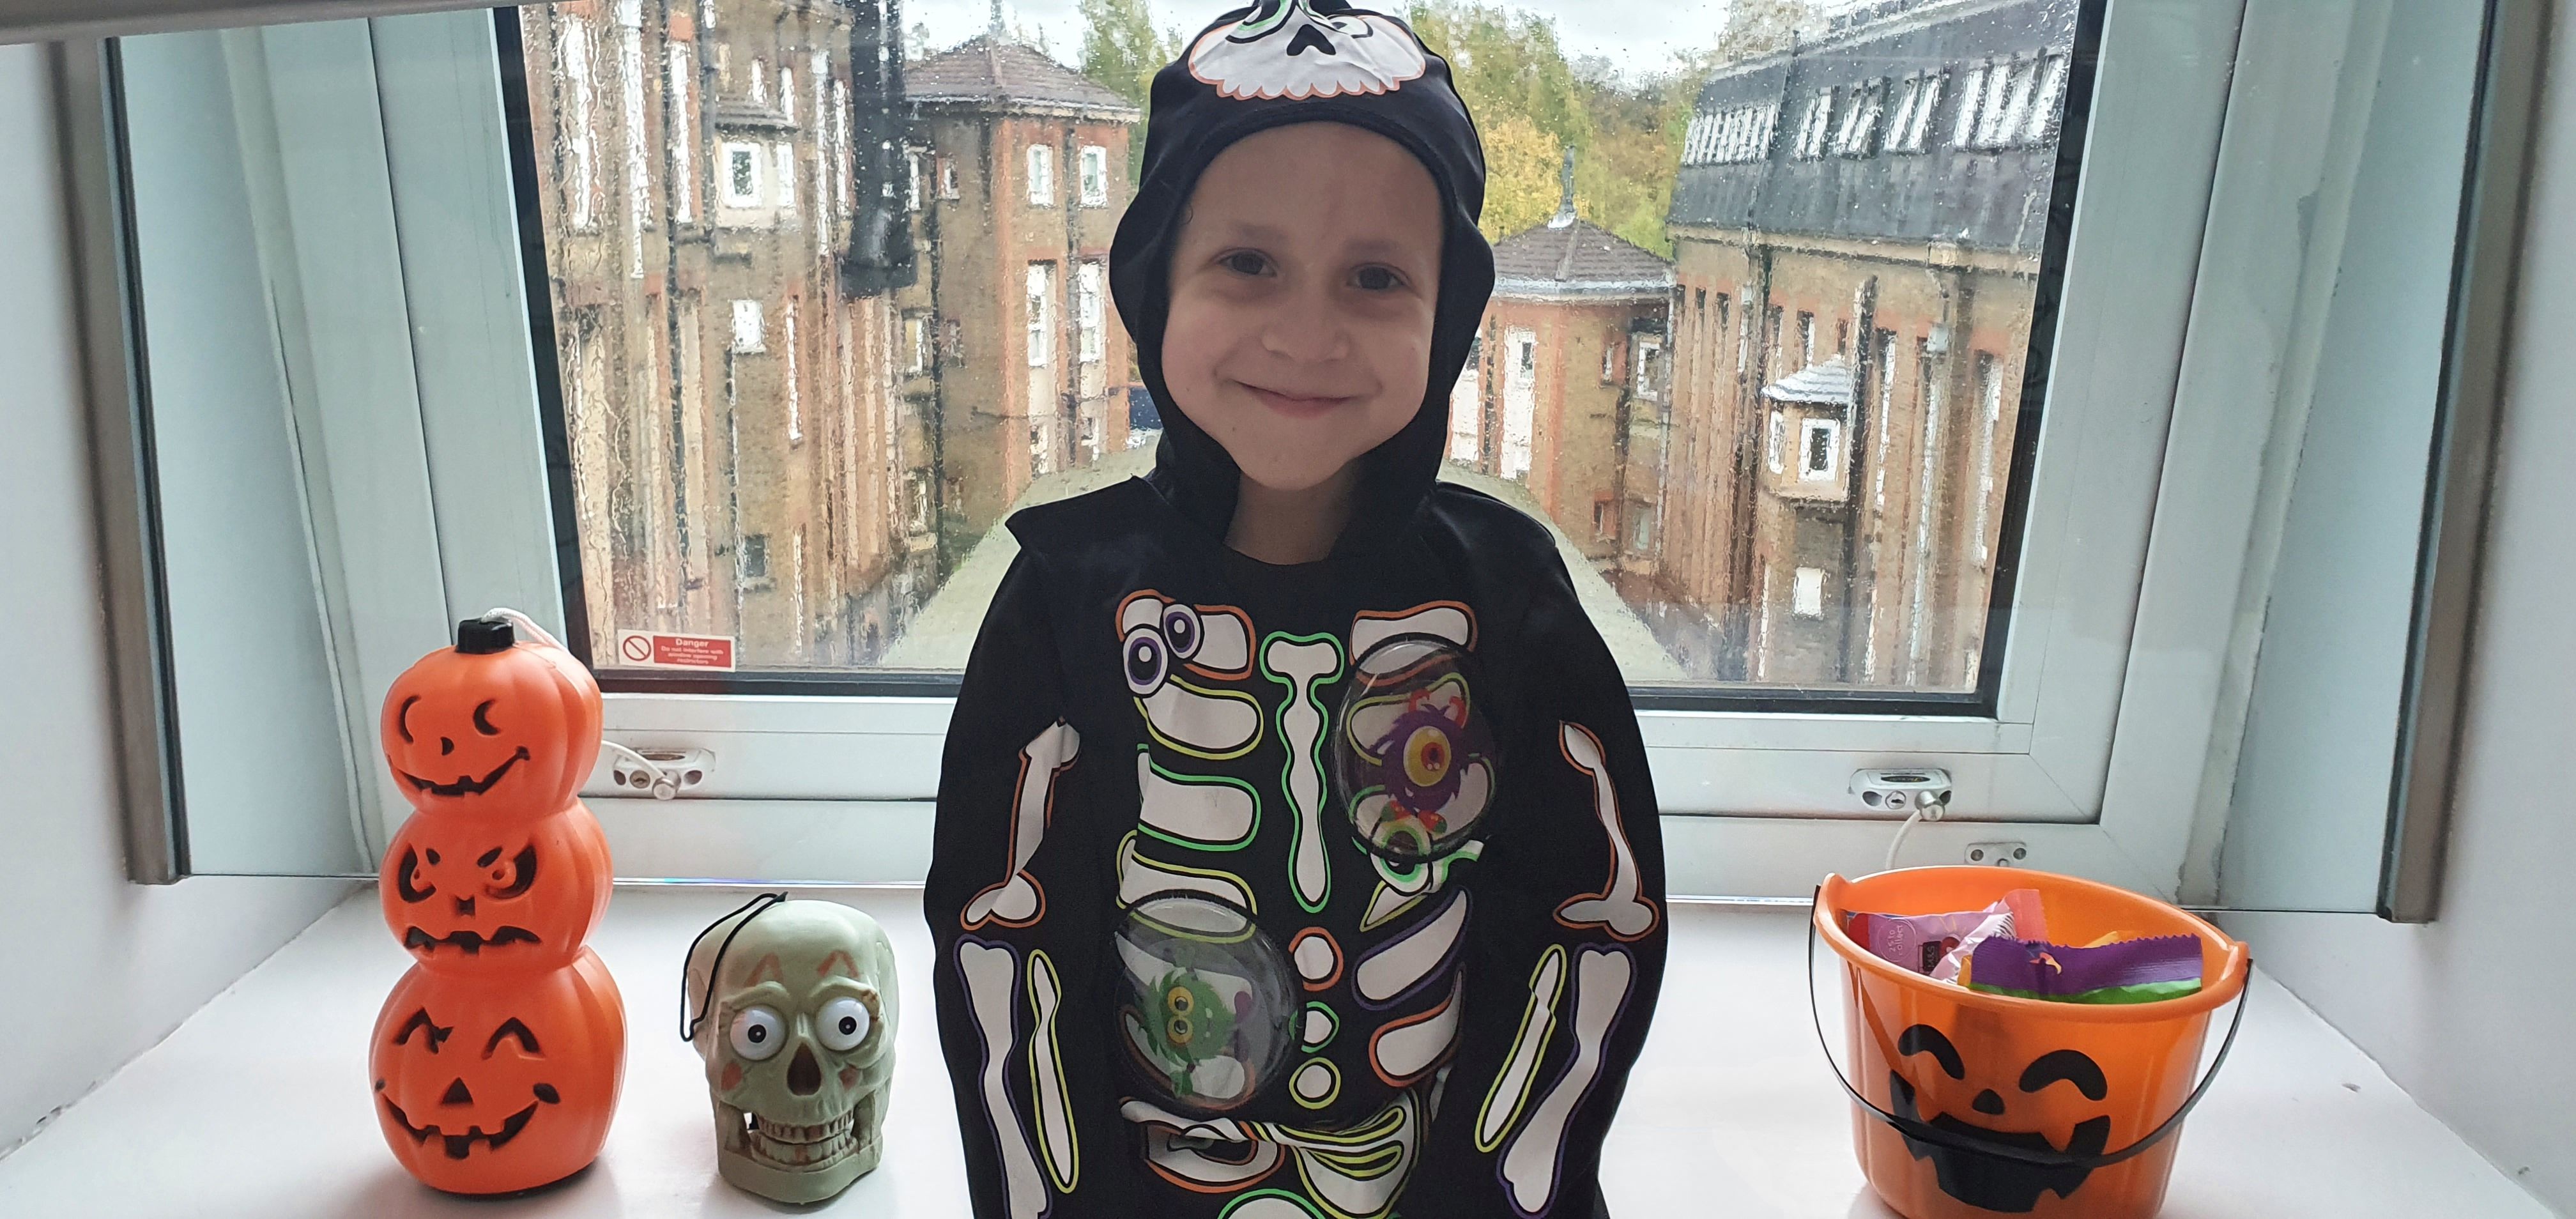 Zak is dressed up in a skeleton costume for Halloween.